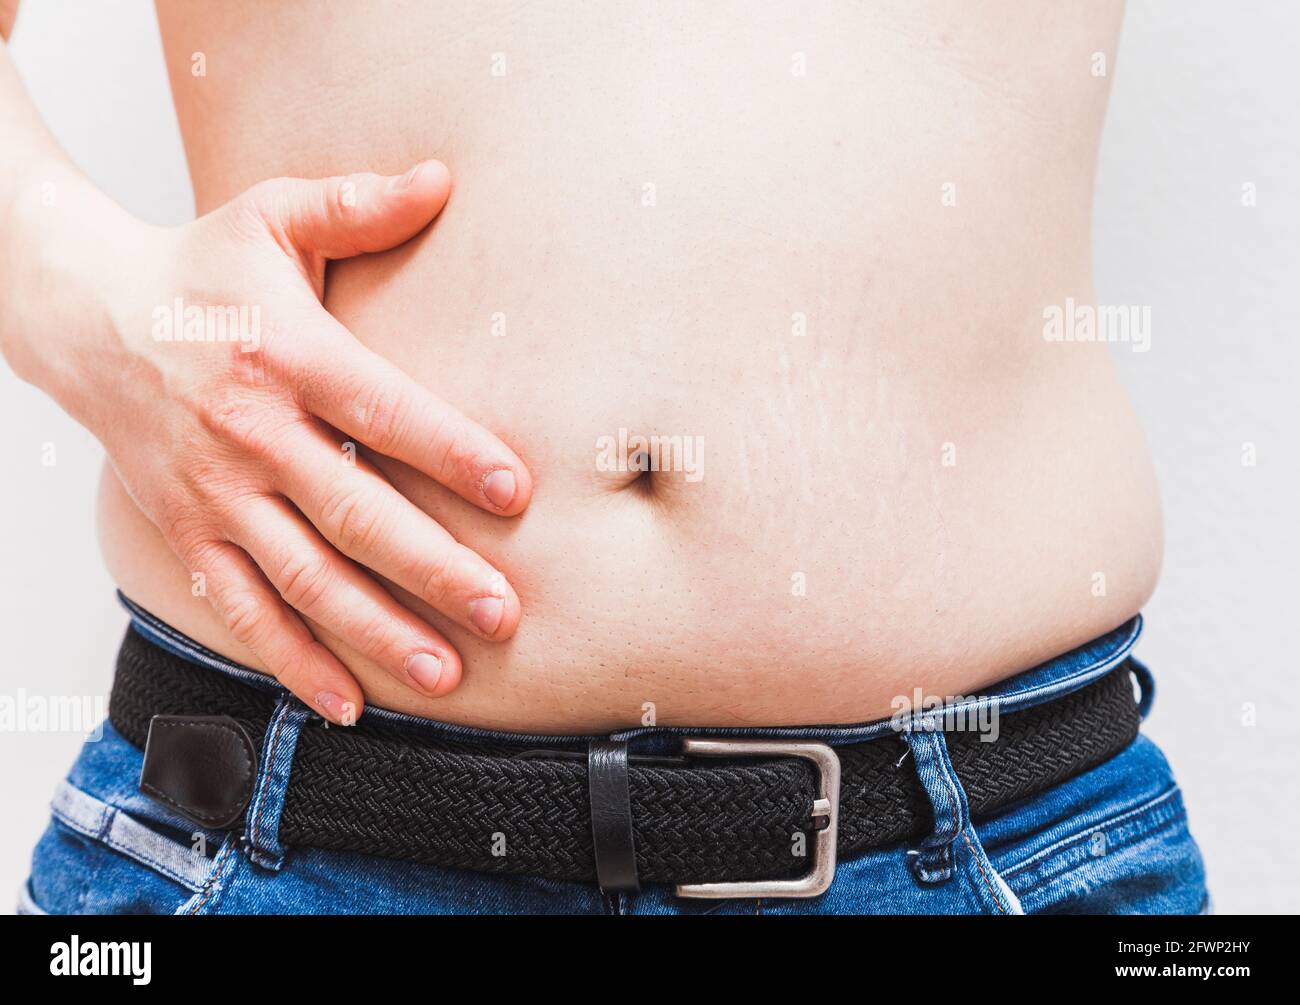 An unrecognizable fat man touches his belly with the palm of his hand. The man is wearing blue jeans and a black be Stock Photo